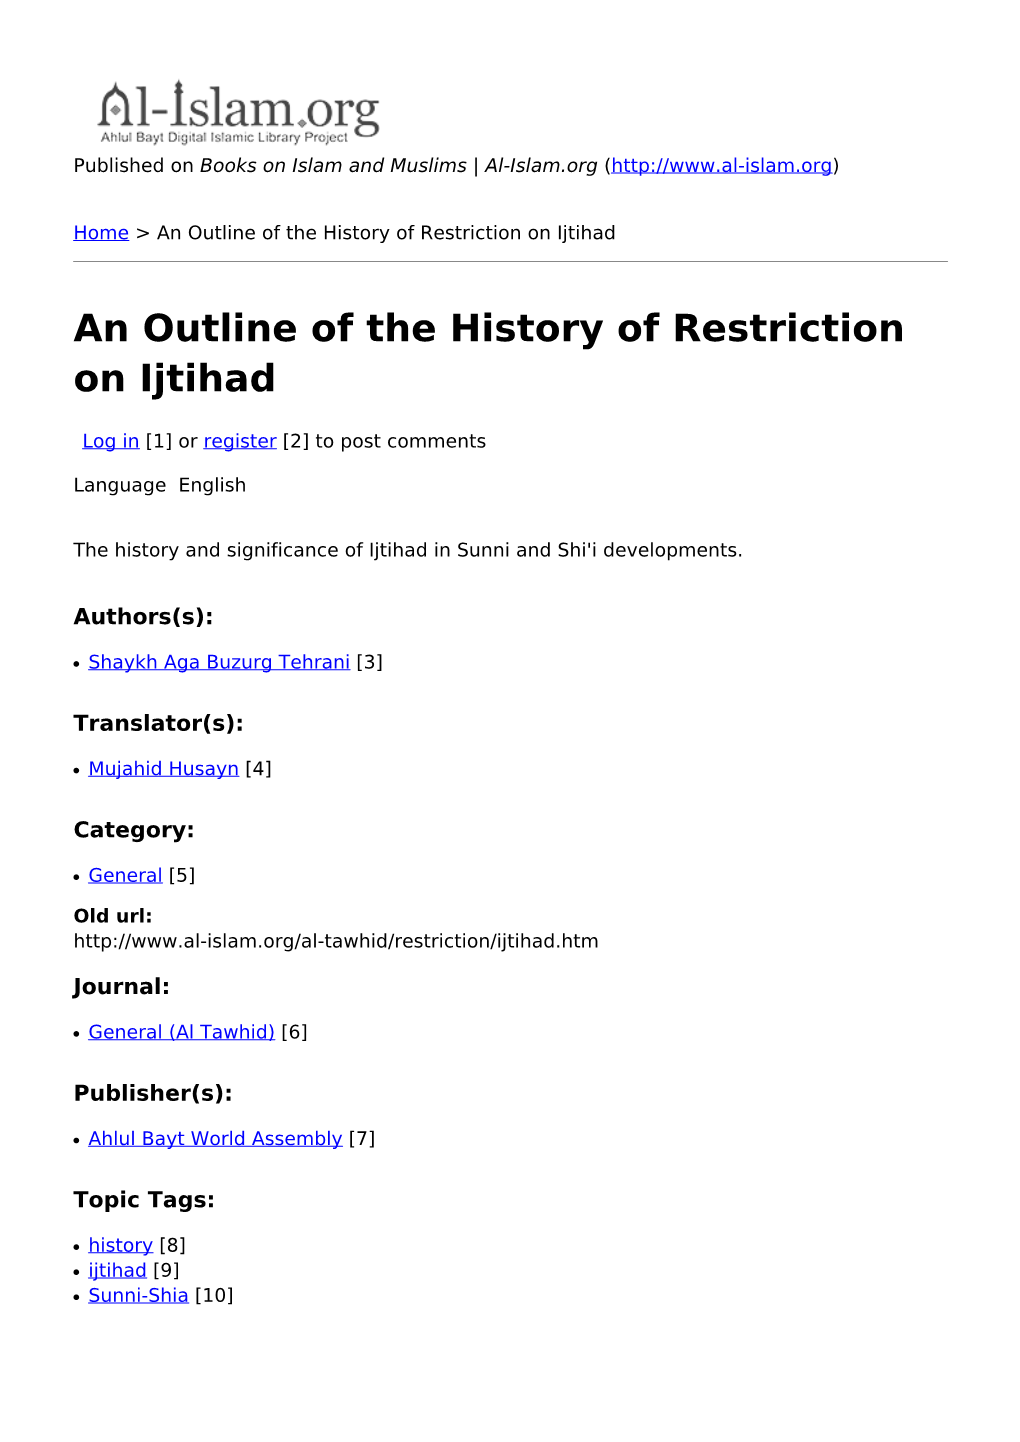 An Outline of the History of Restriction on Ijtihad